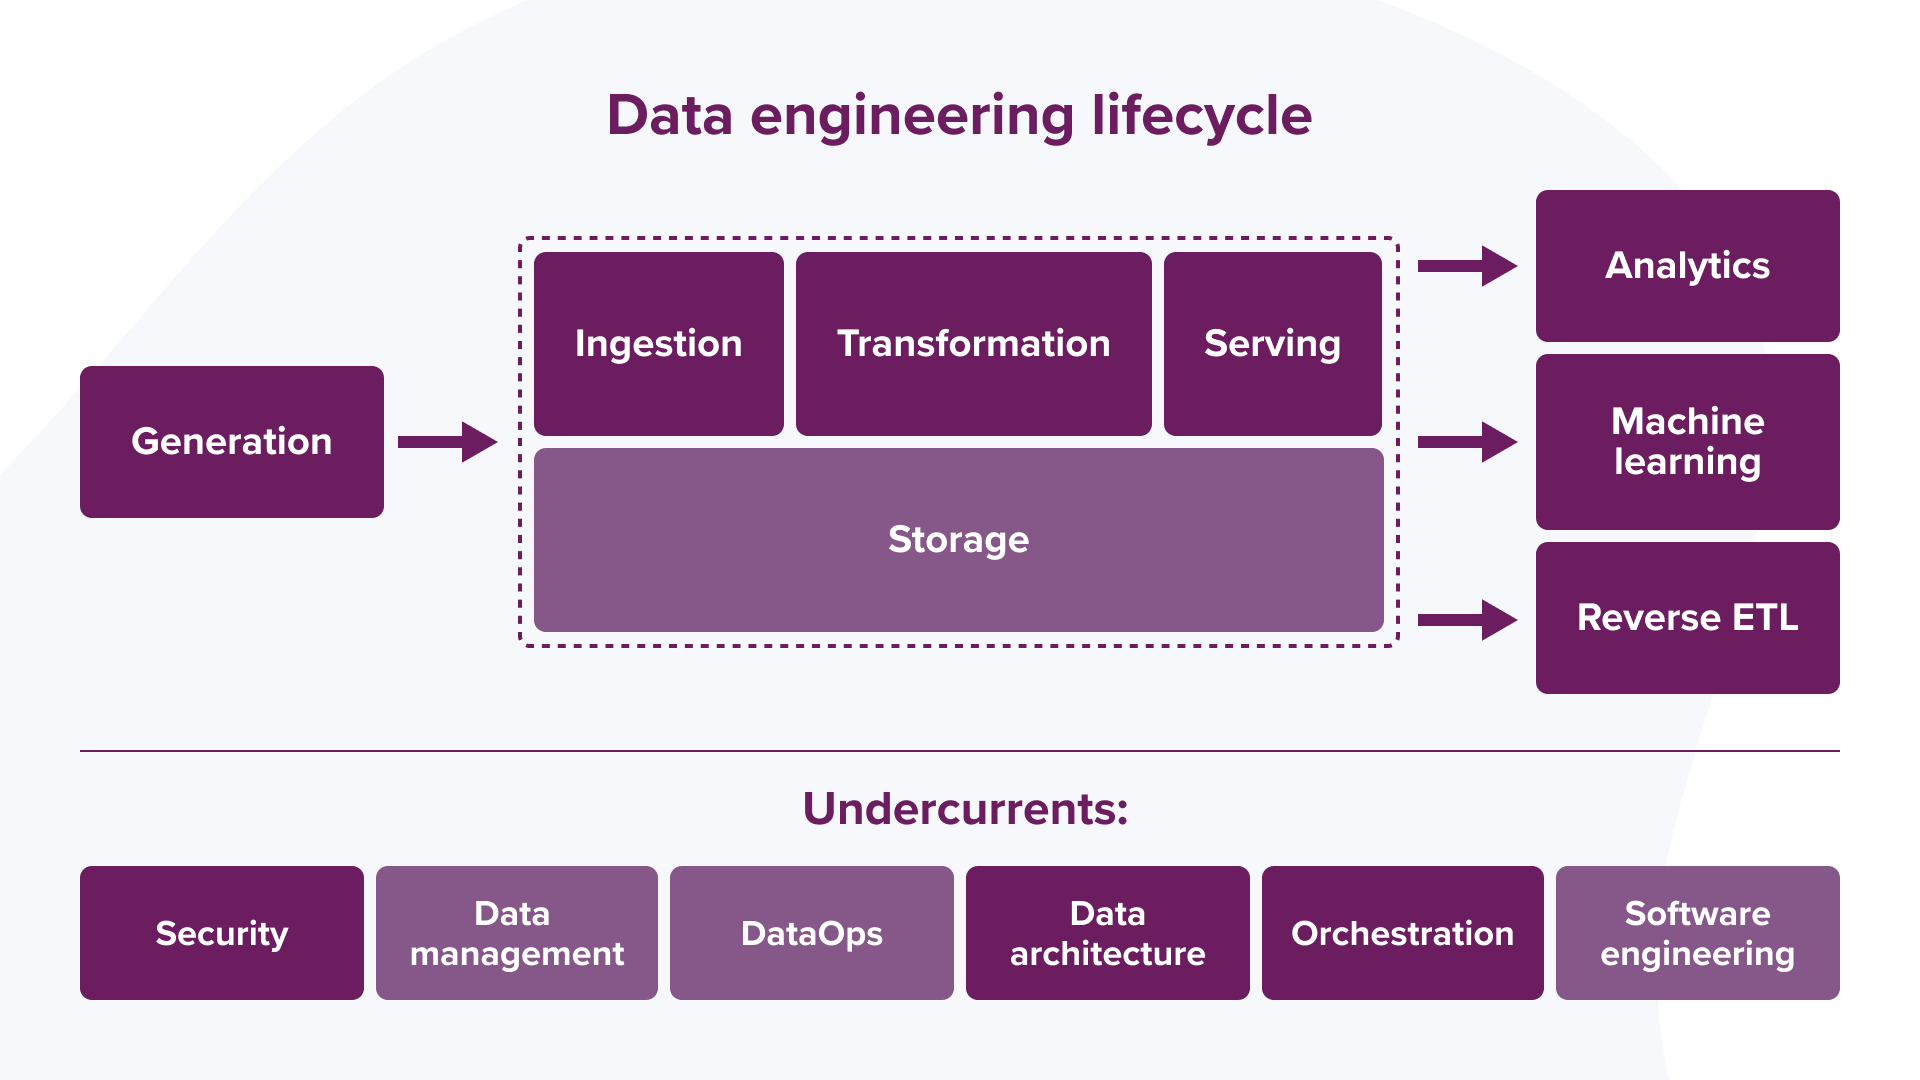 A graph of the Data Engineering lifecycle and the undercurrents.